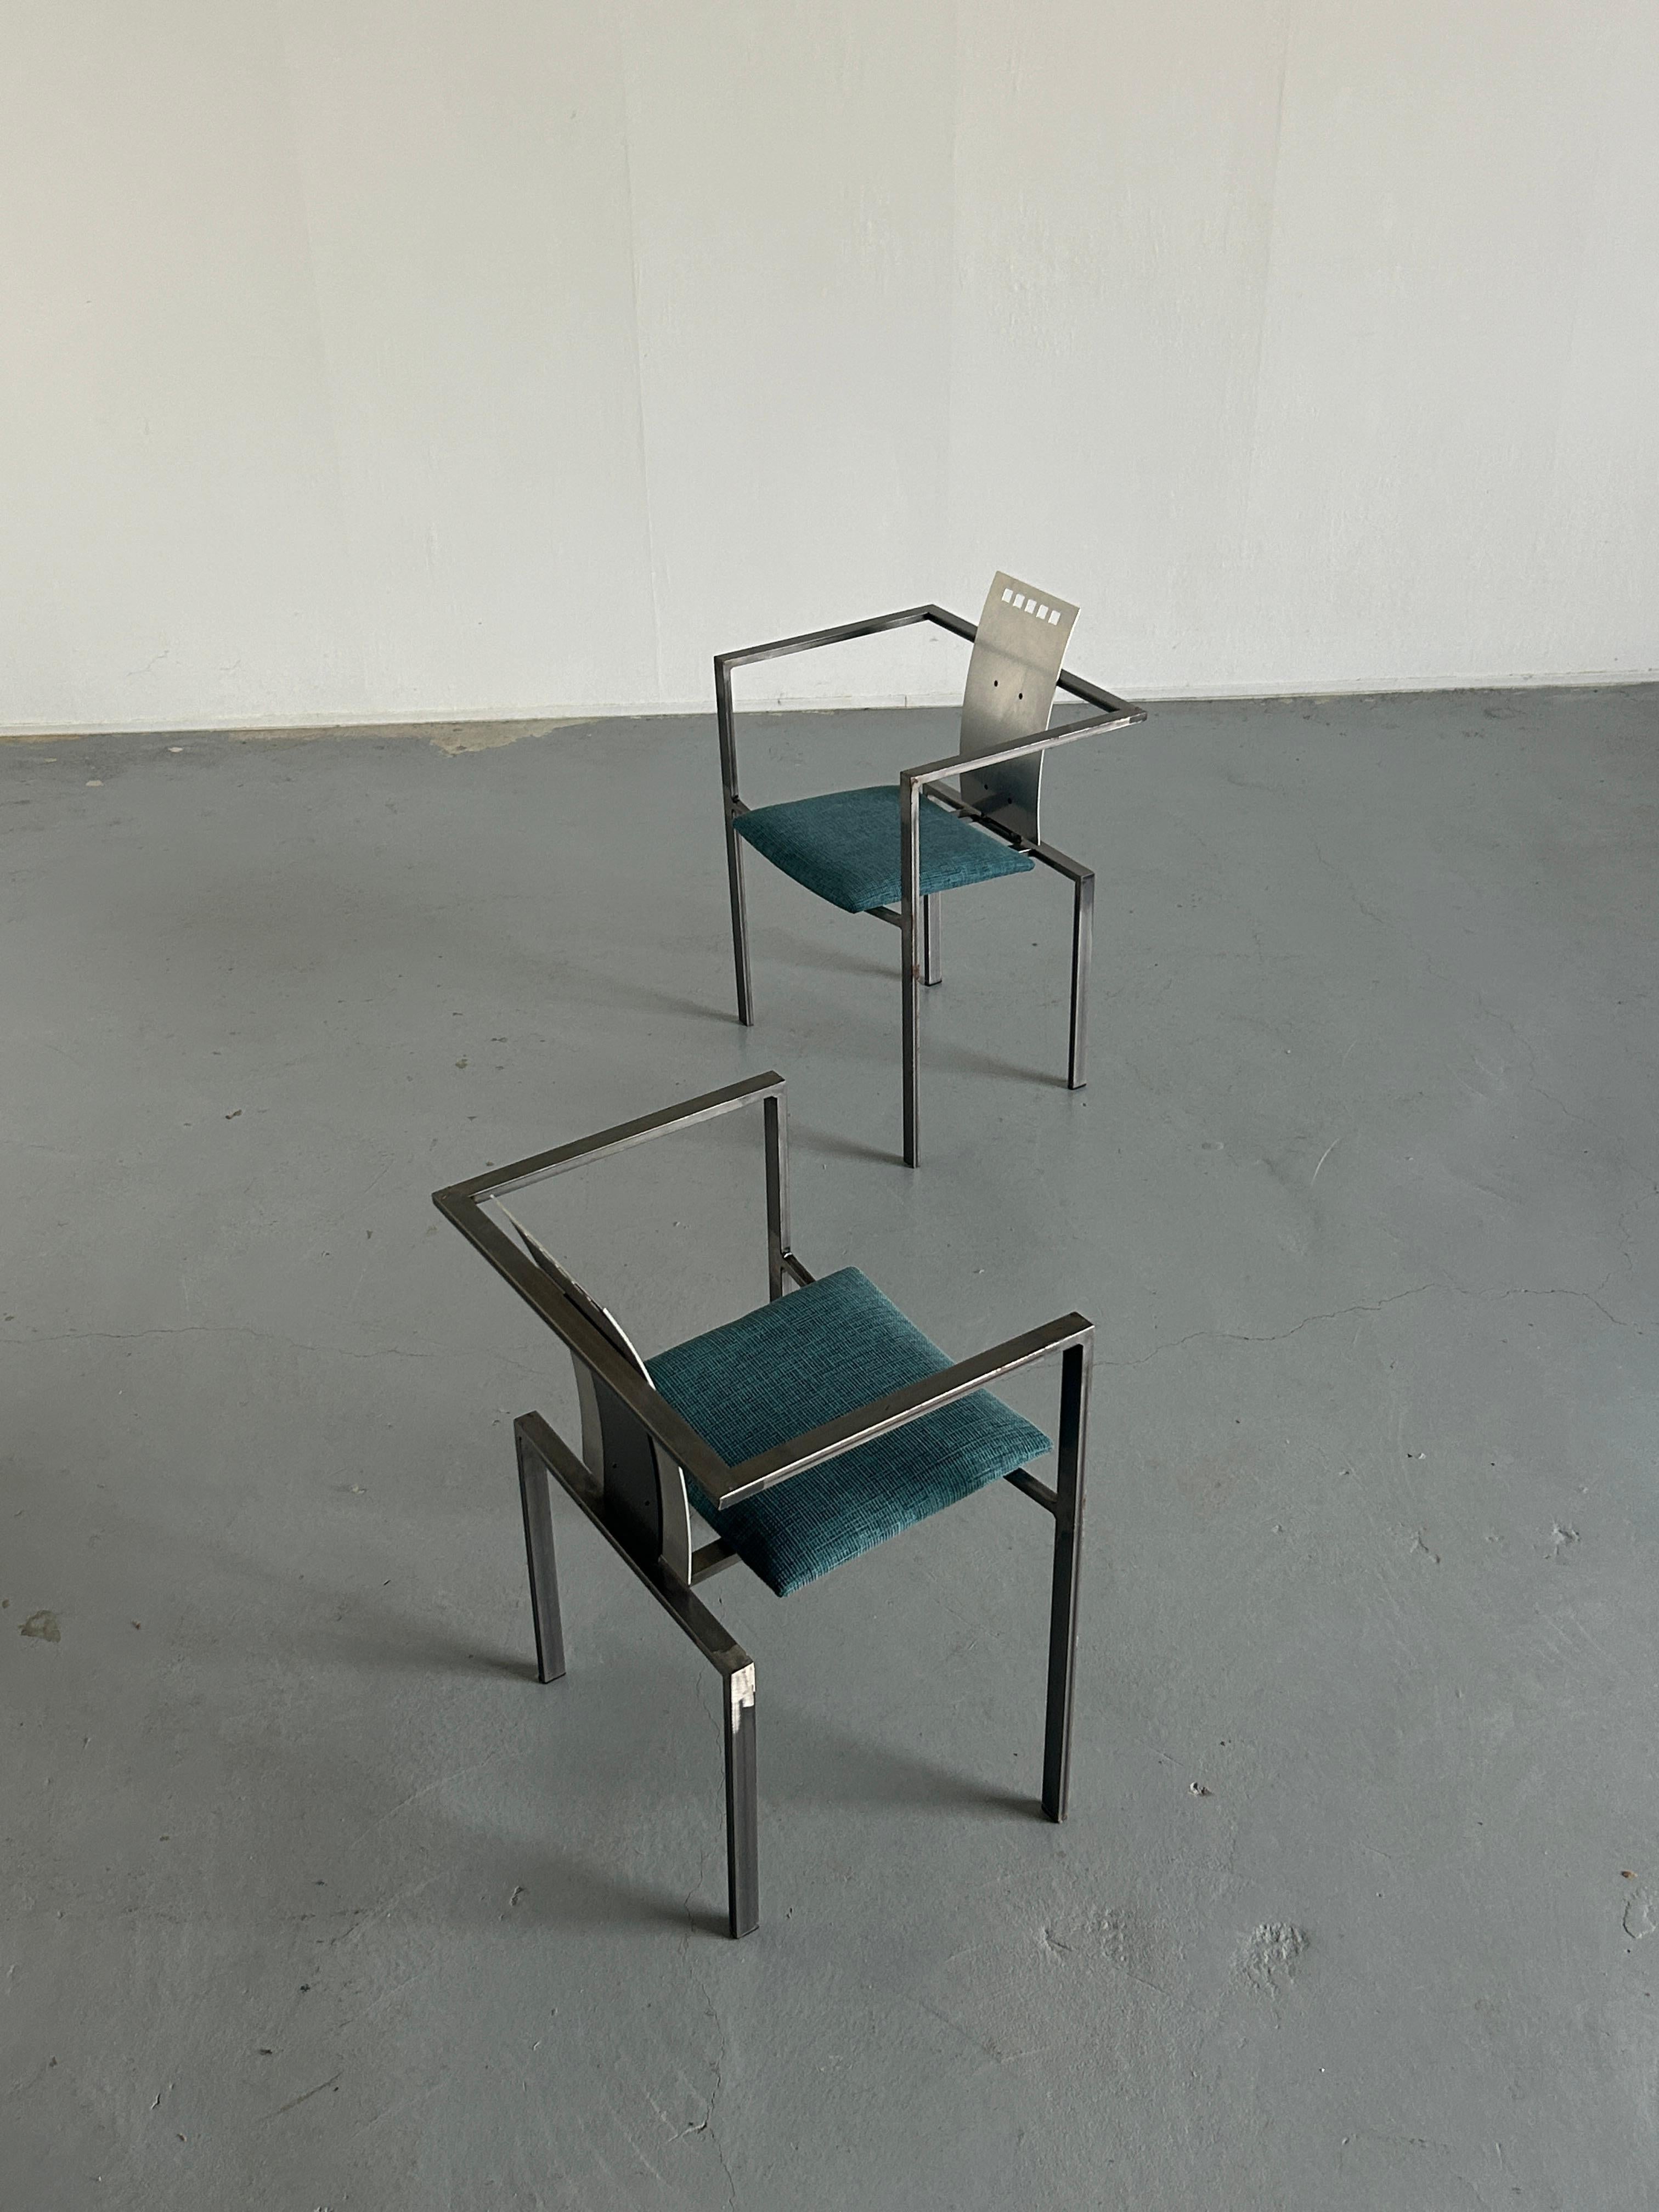 Two steel and bent sheet metal postmodern chairs designed in the 1980s in Germany by Karl Friedrich Förste for KFF, his own manufacturing company. Unique, geometrical and Memphis-influenced design. 

Overall well preserved and in very good vintage